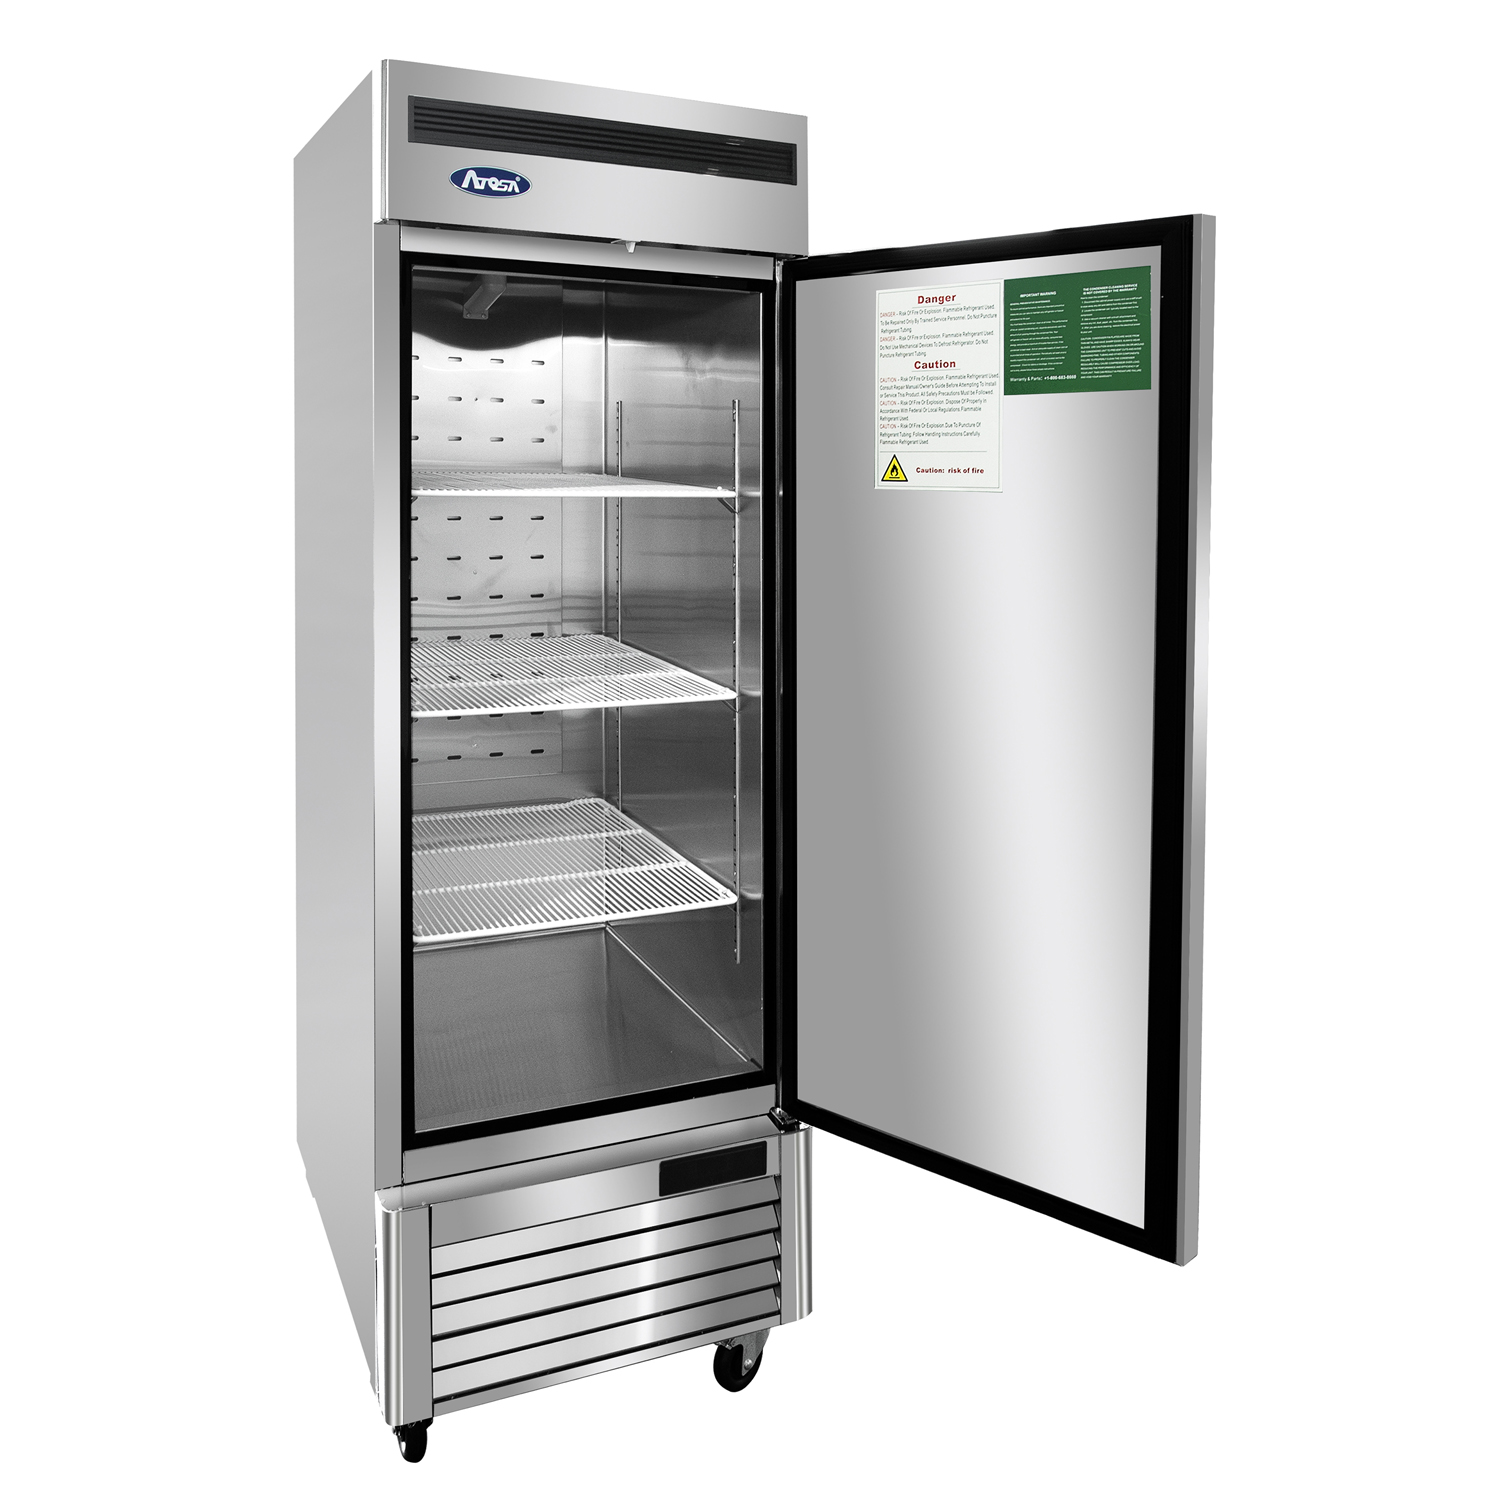 Atosa Reach-In Freezer MBF8501GRL, One Section, 27"W, 19.1 cu. ft - Left Hinge image 1